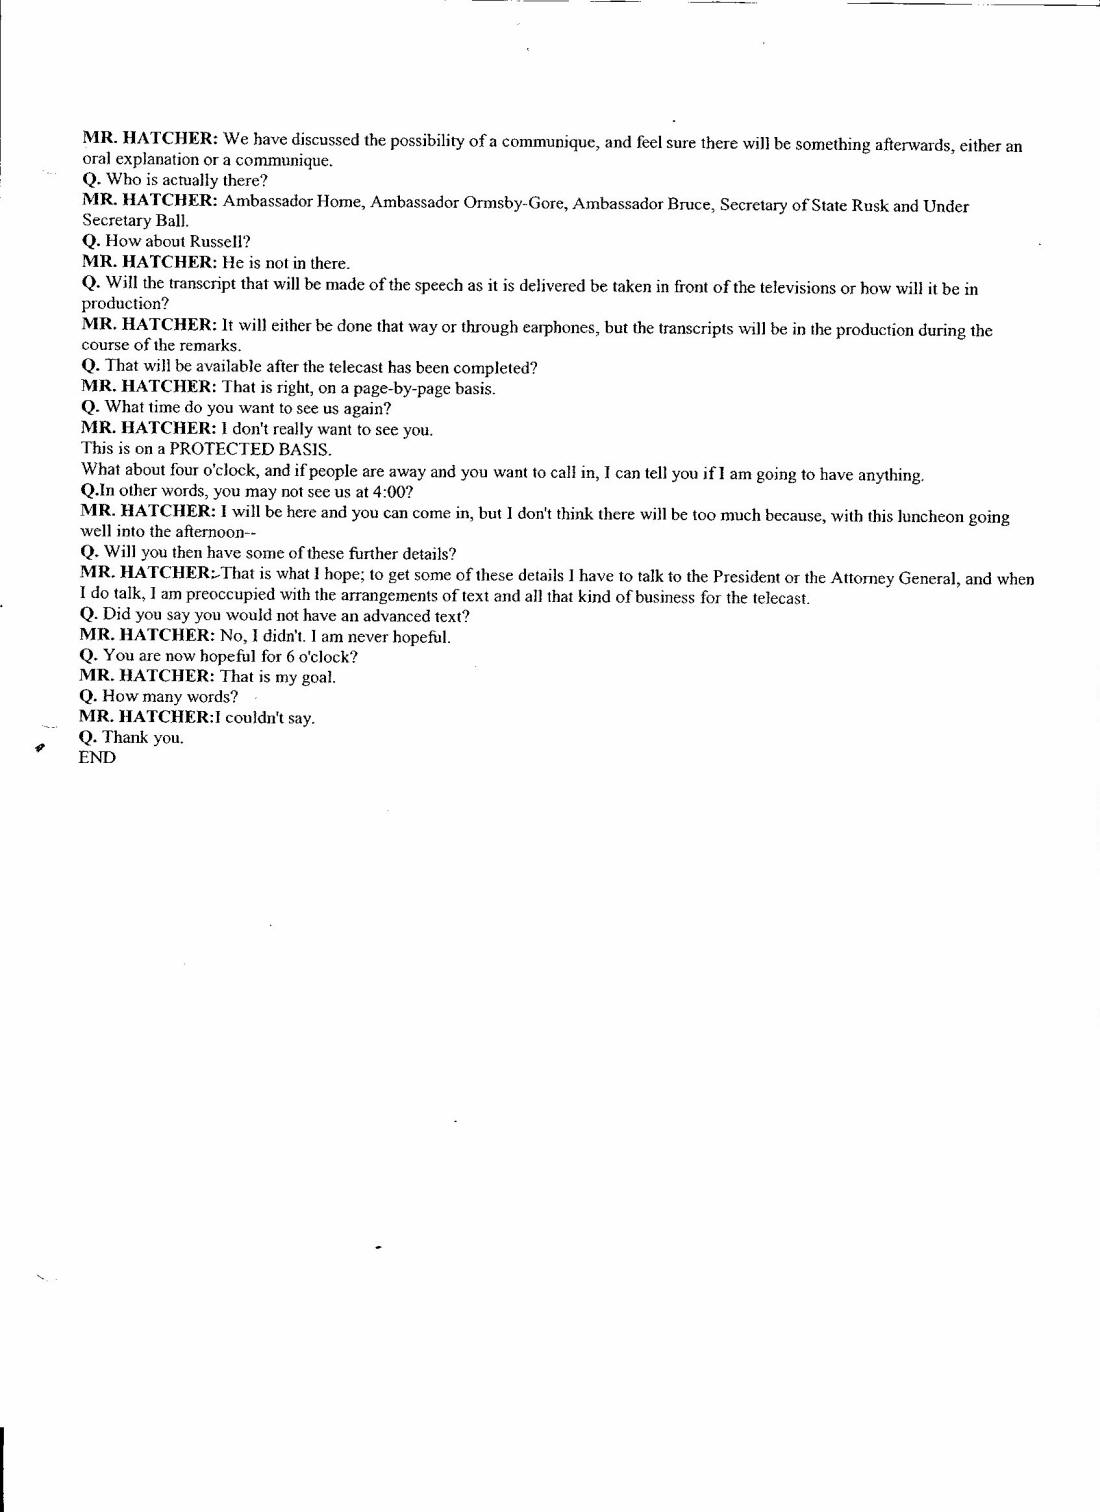 Transcript of News Conference page 5